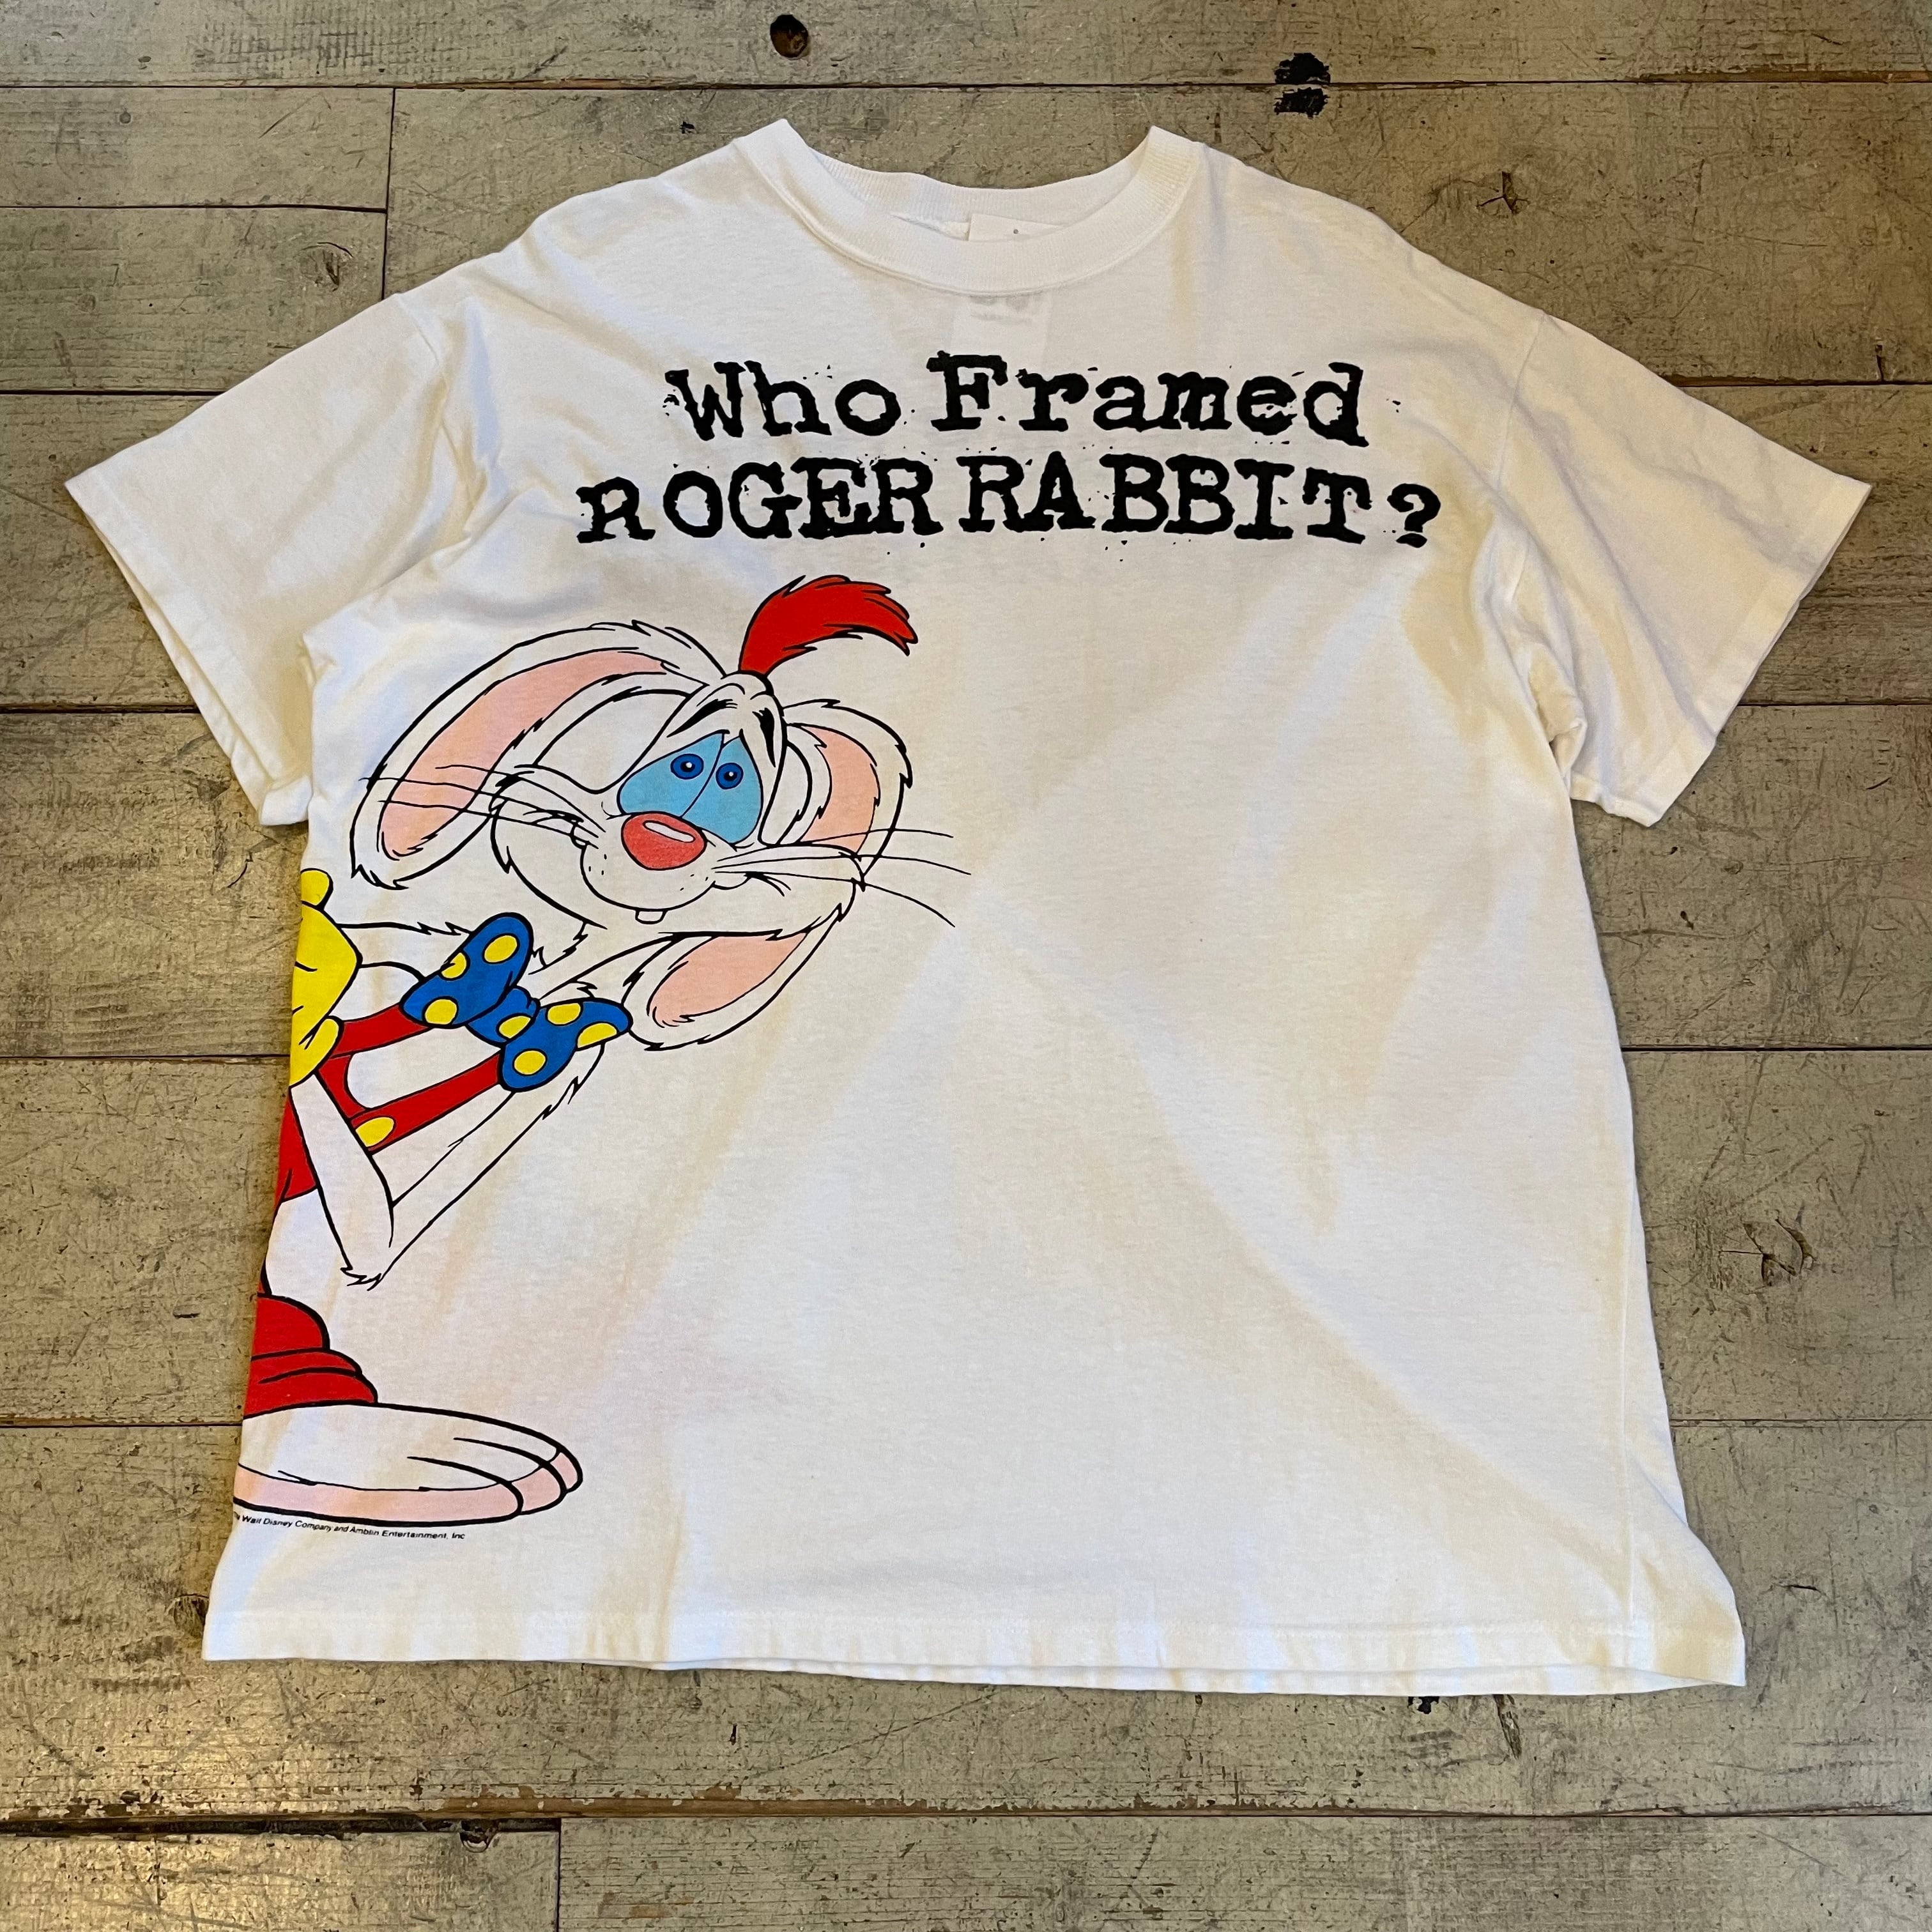 Special!! 1987s ROGER RABBIT T-shirt | What’z up powered by BASE